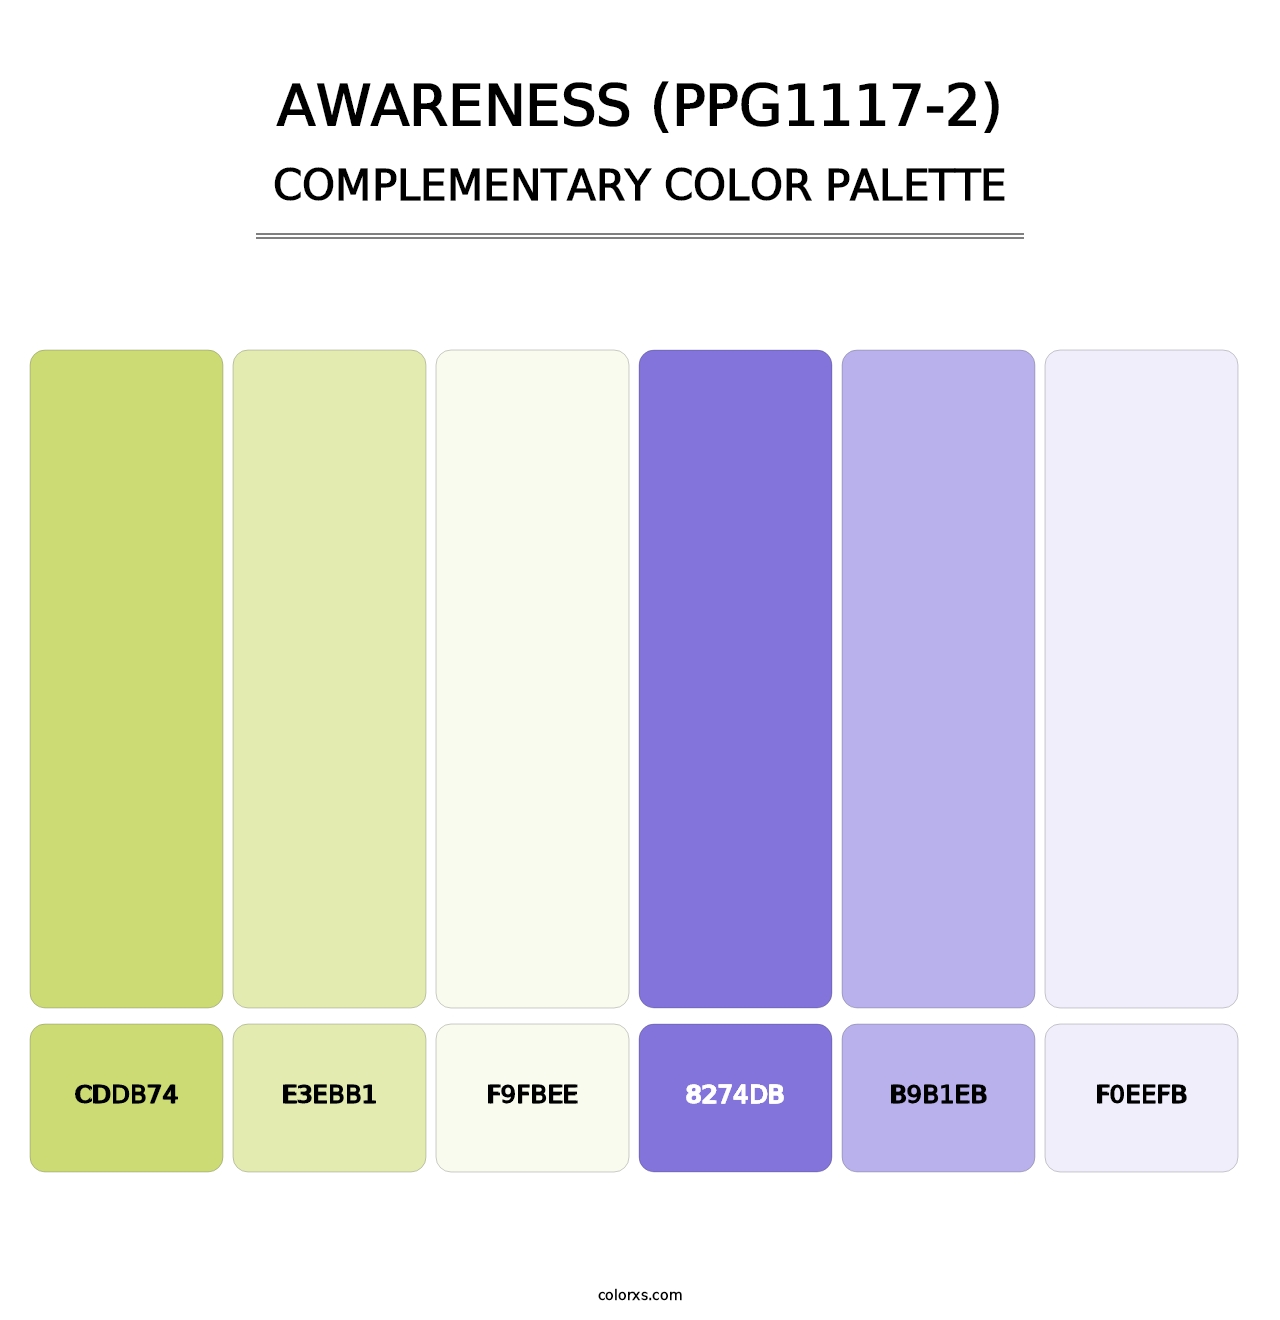 Awareness (PPG1117-2) - Complementary Color Palette